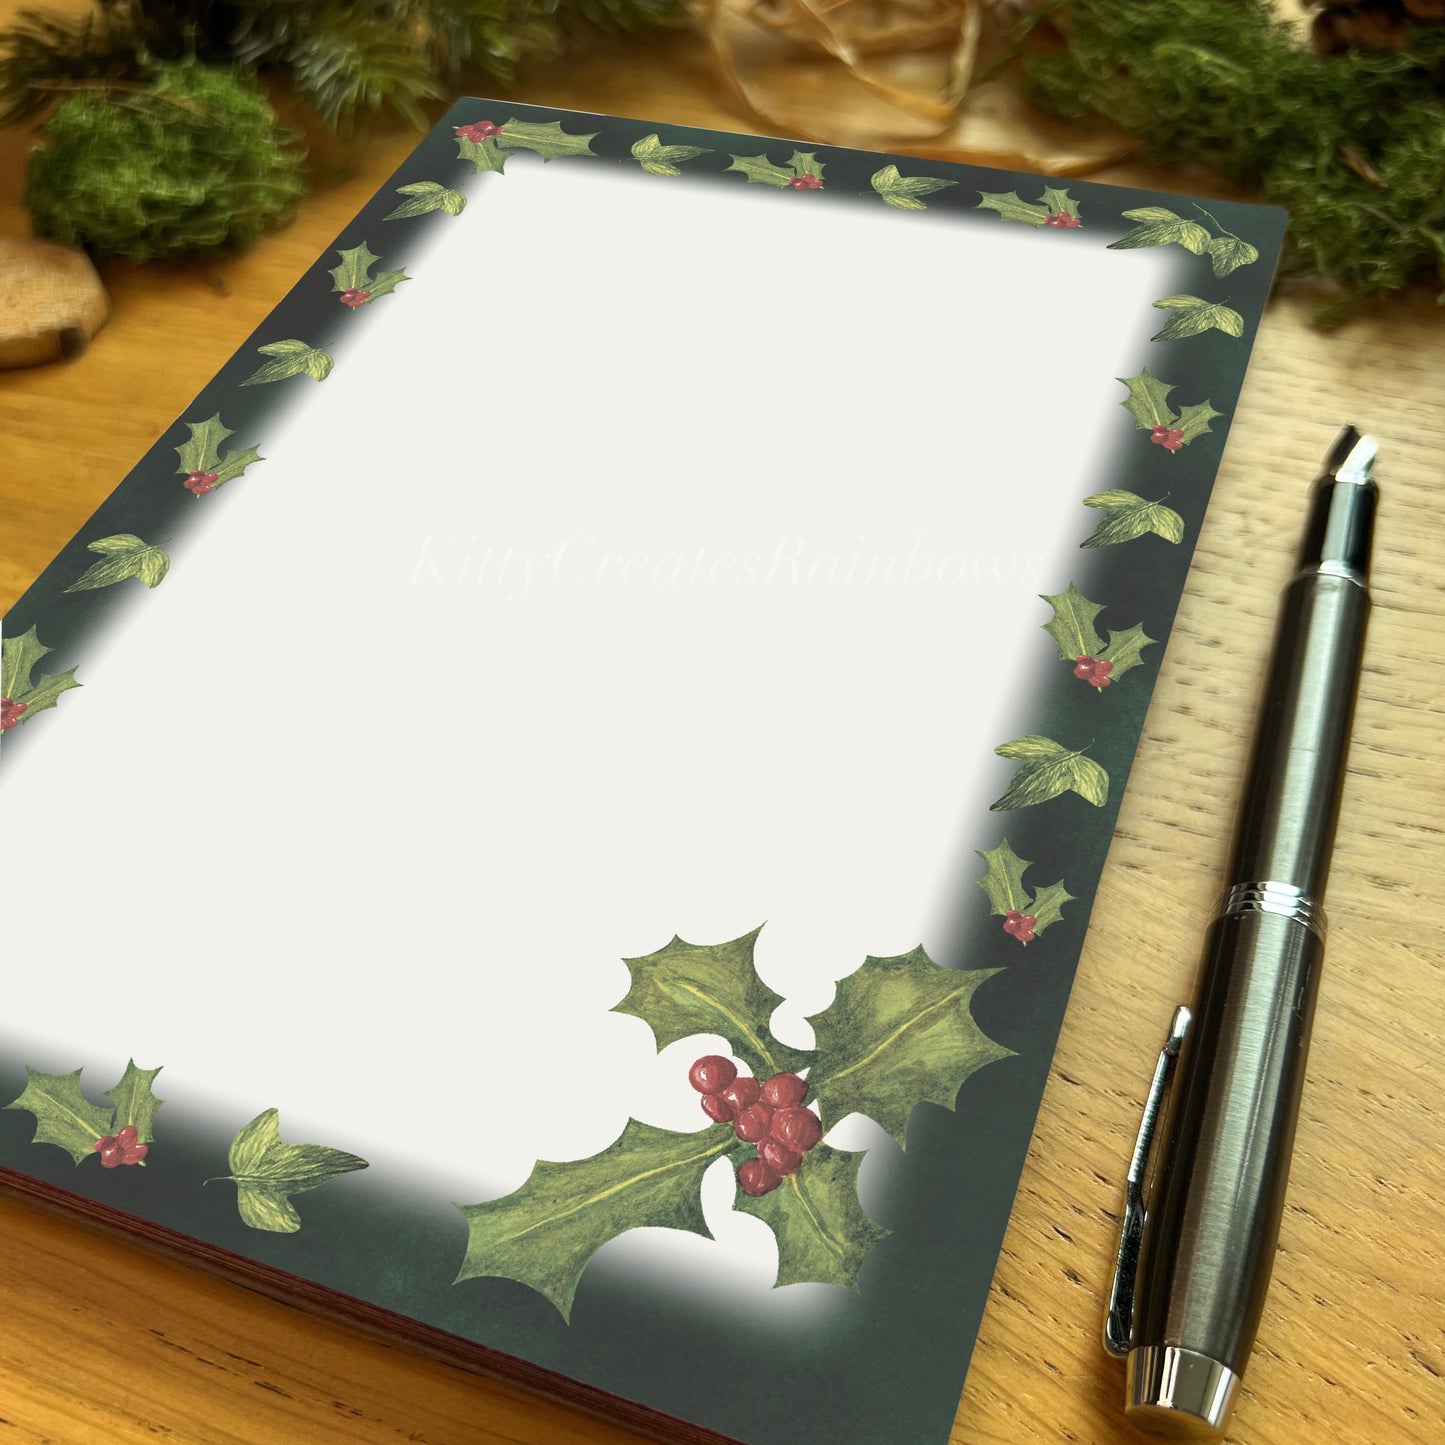 Winters bloom Holly sprig with red berries Winters bloom red rose illustrated notepad with dark evergreen border, on a wooden table with fountain pen